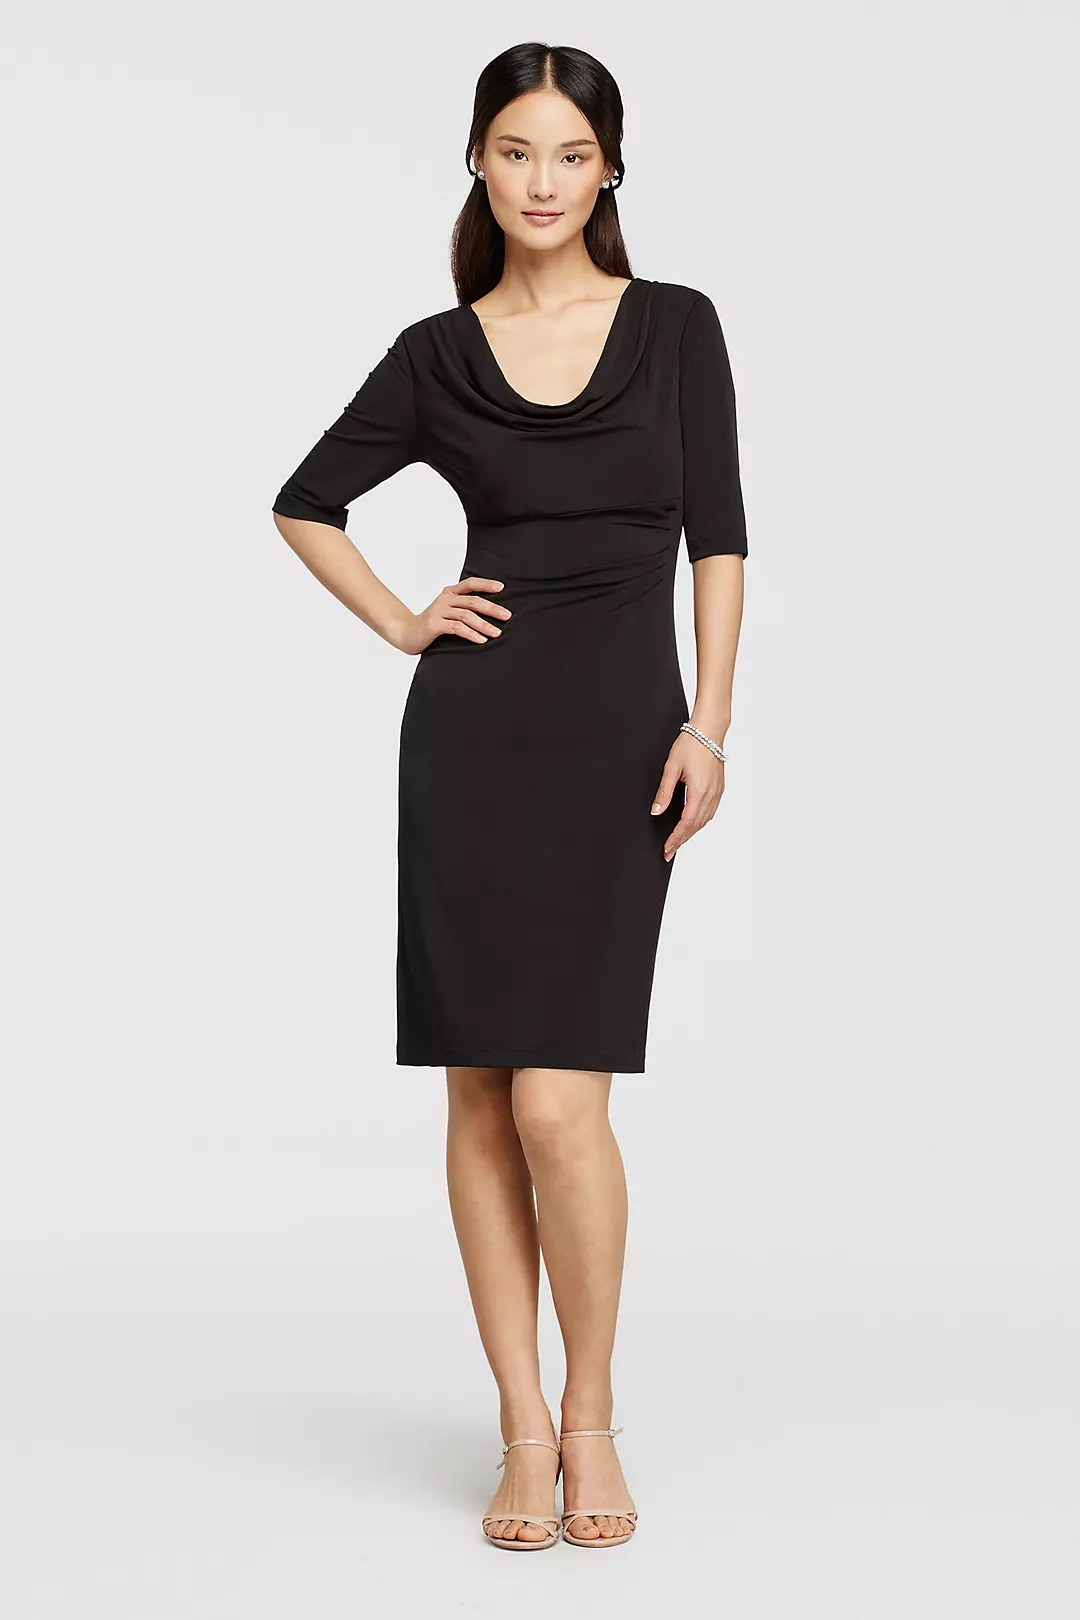 Short Cowl Neck Dress with Elbow Length Sleeves Image